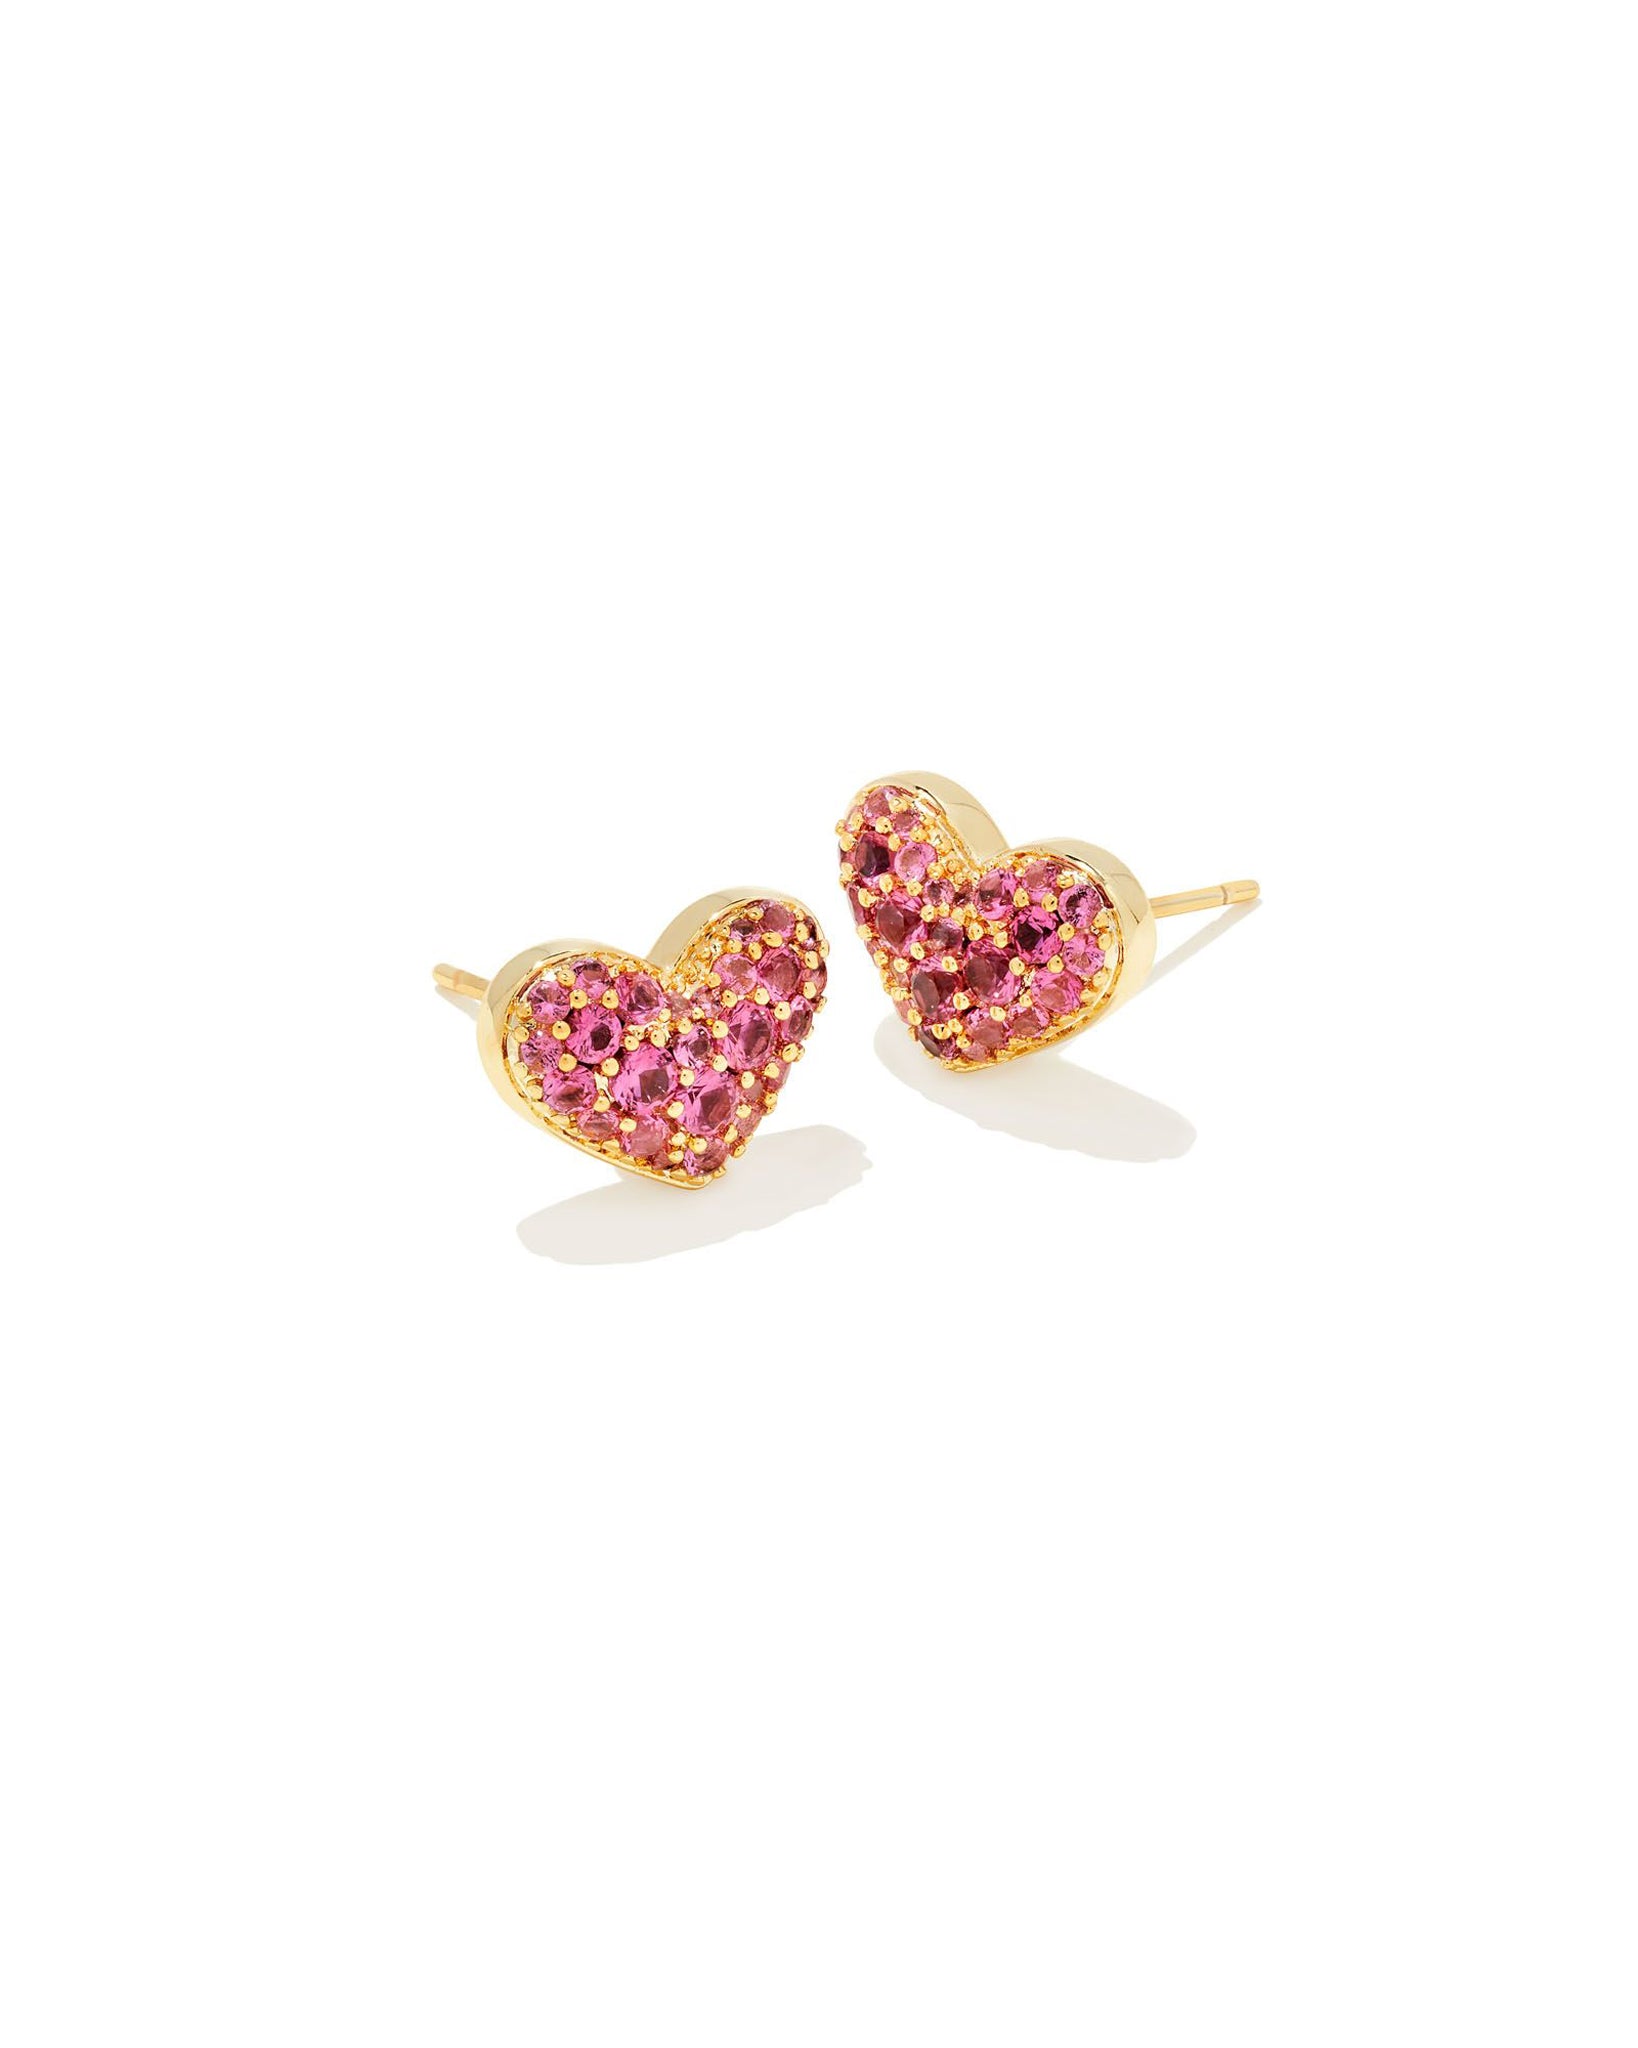 Kendra Scott Ari Pave Crystal Heart Stud Earrings in Pink Crystal and Gold Plated